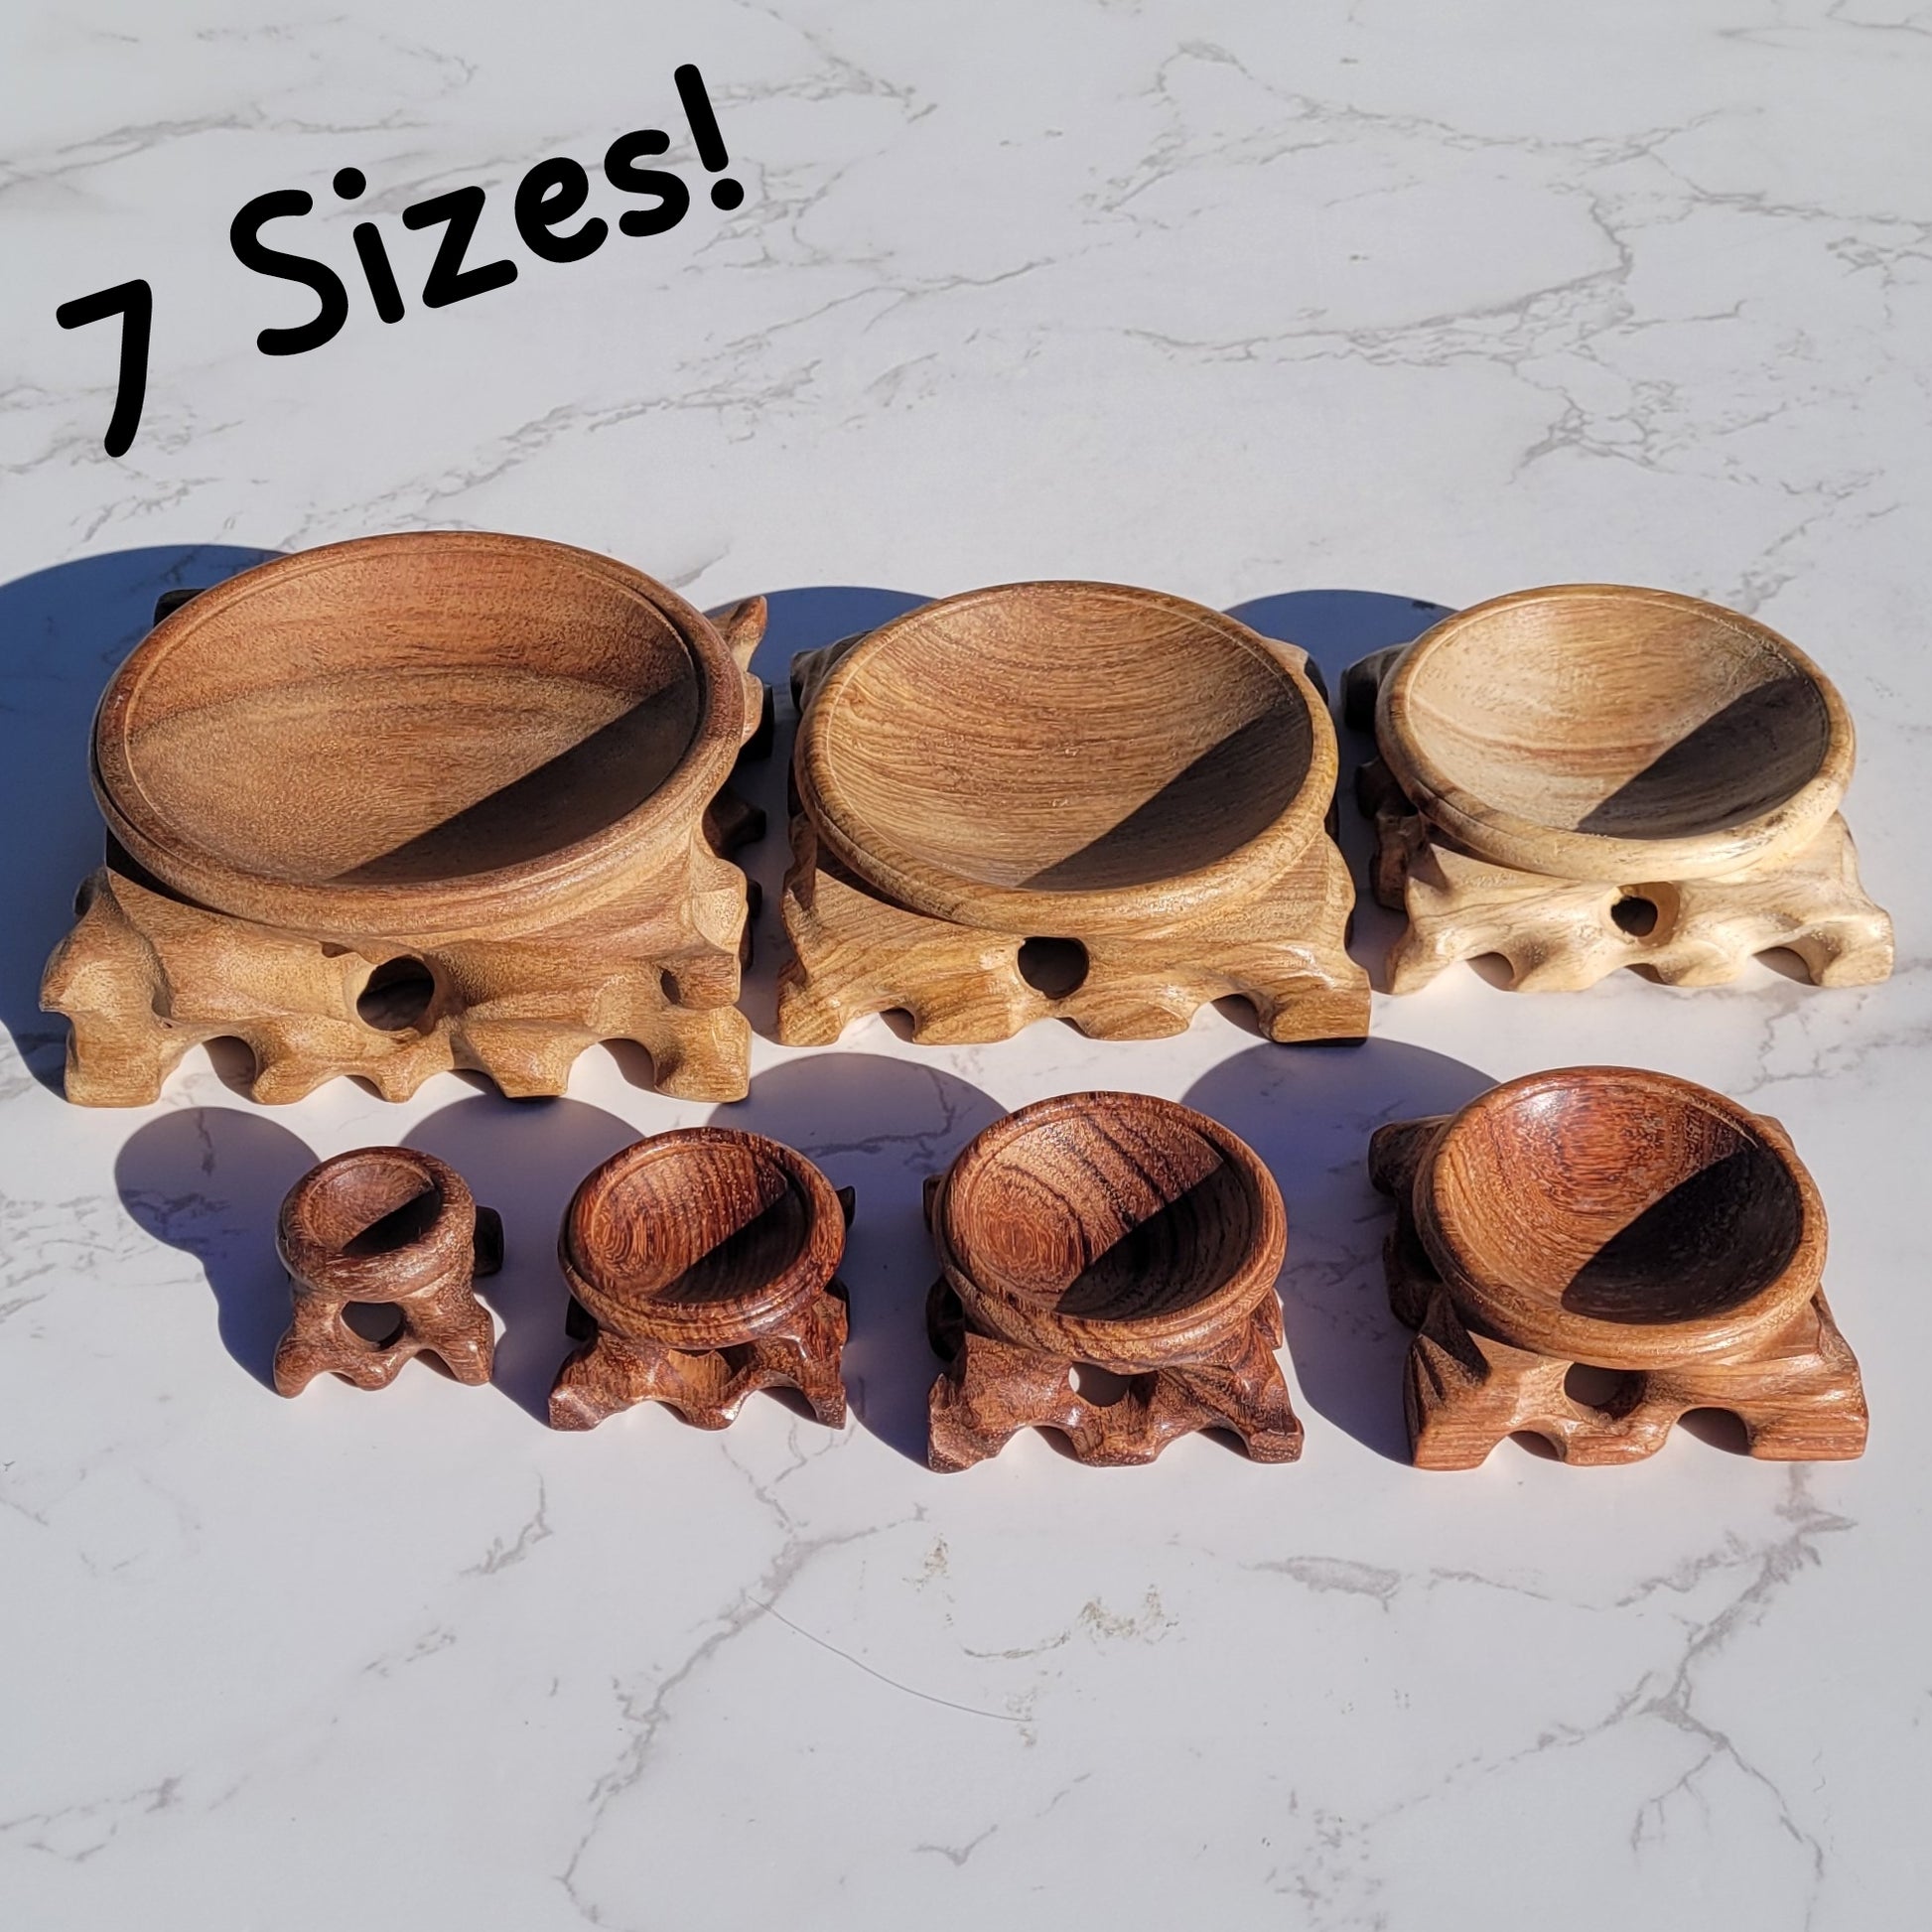 Acid branch wood sphere stand in 7 heavy duty sphere stand sizes